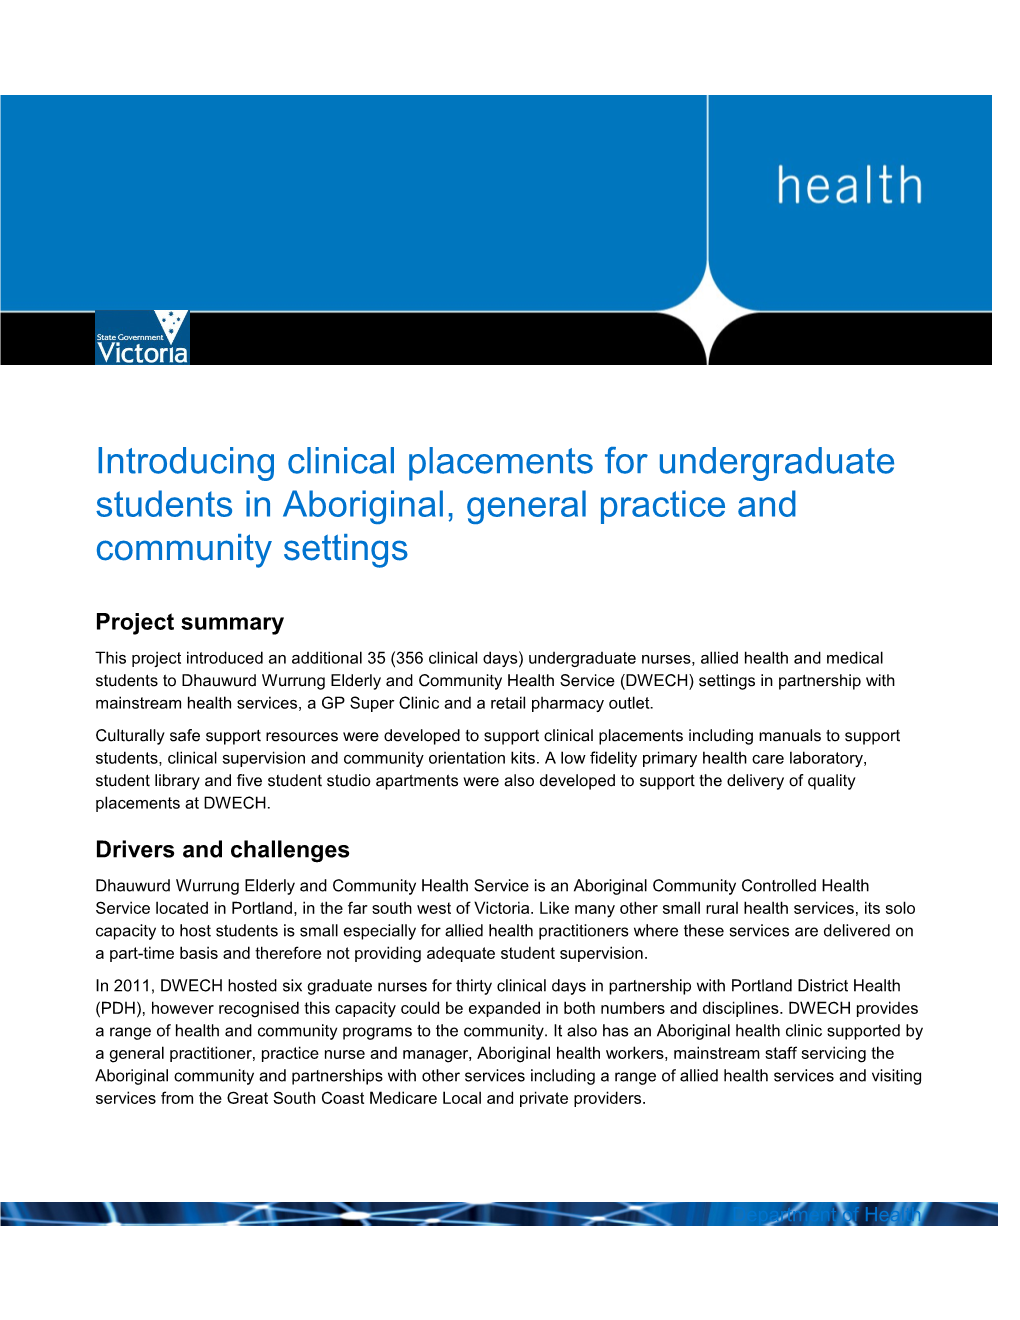 Introducing Clinical Placements for Undergraduate Students in Aboriginal, General Practice